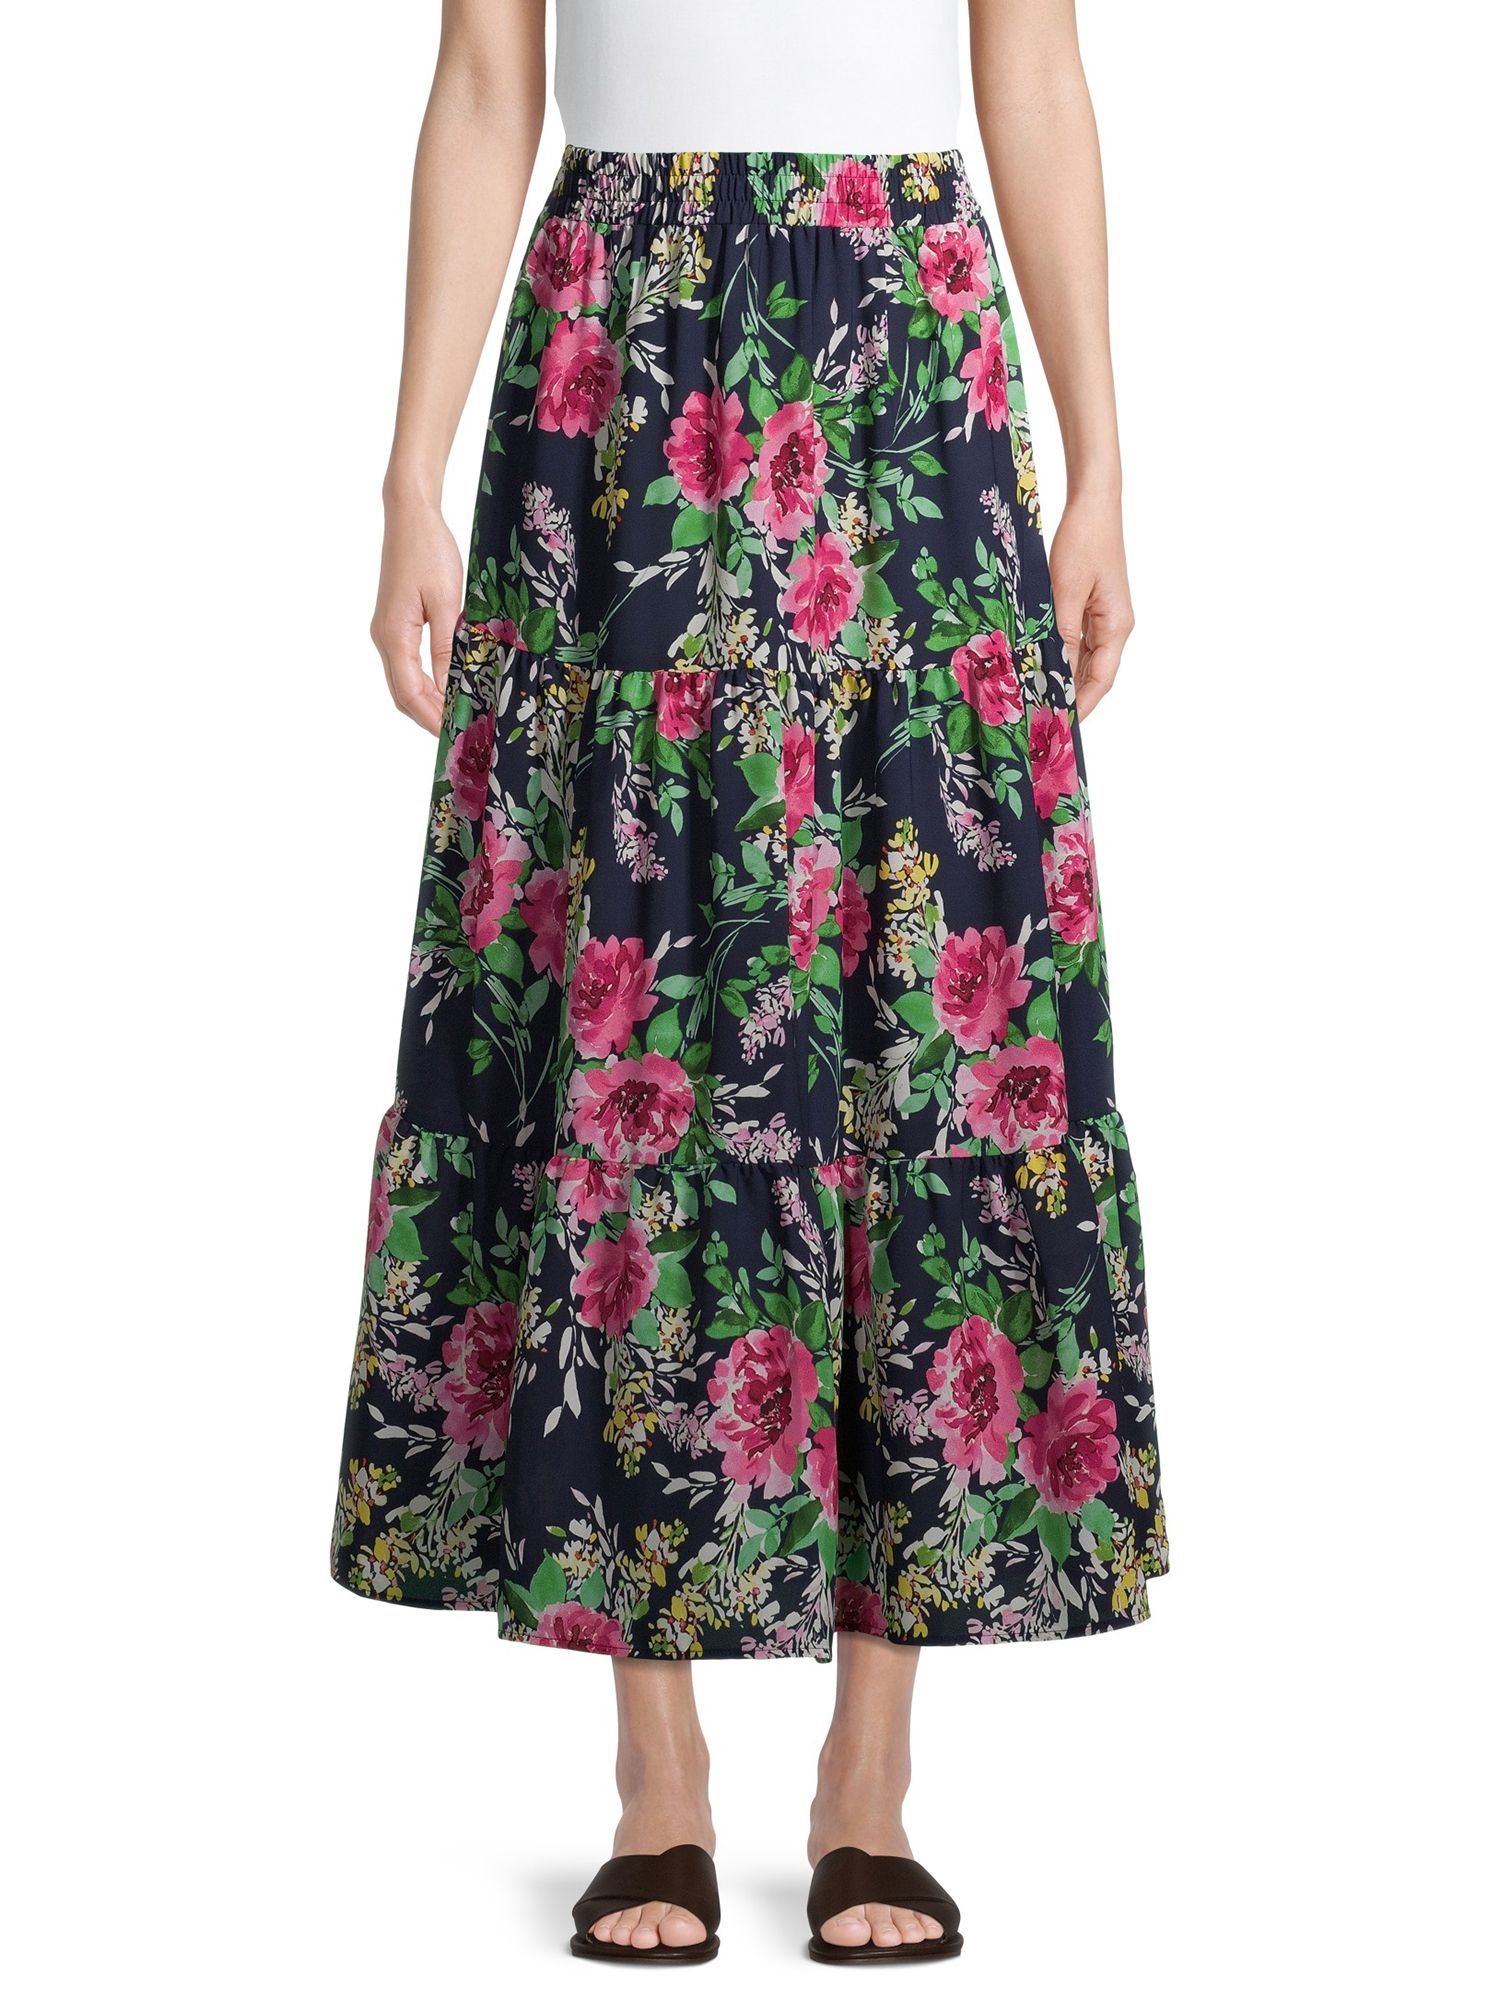 The Pioneer Woman Tiered Floral Skirt